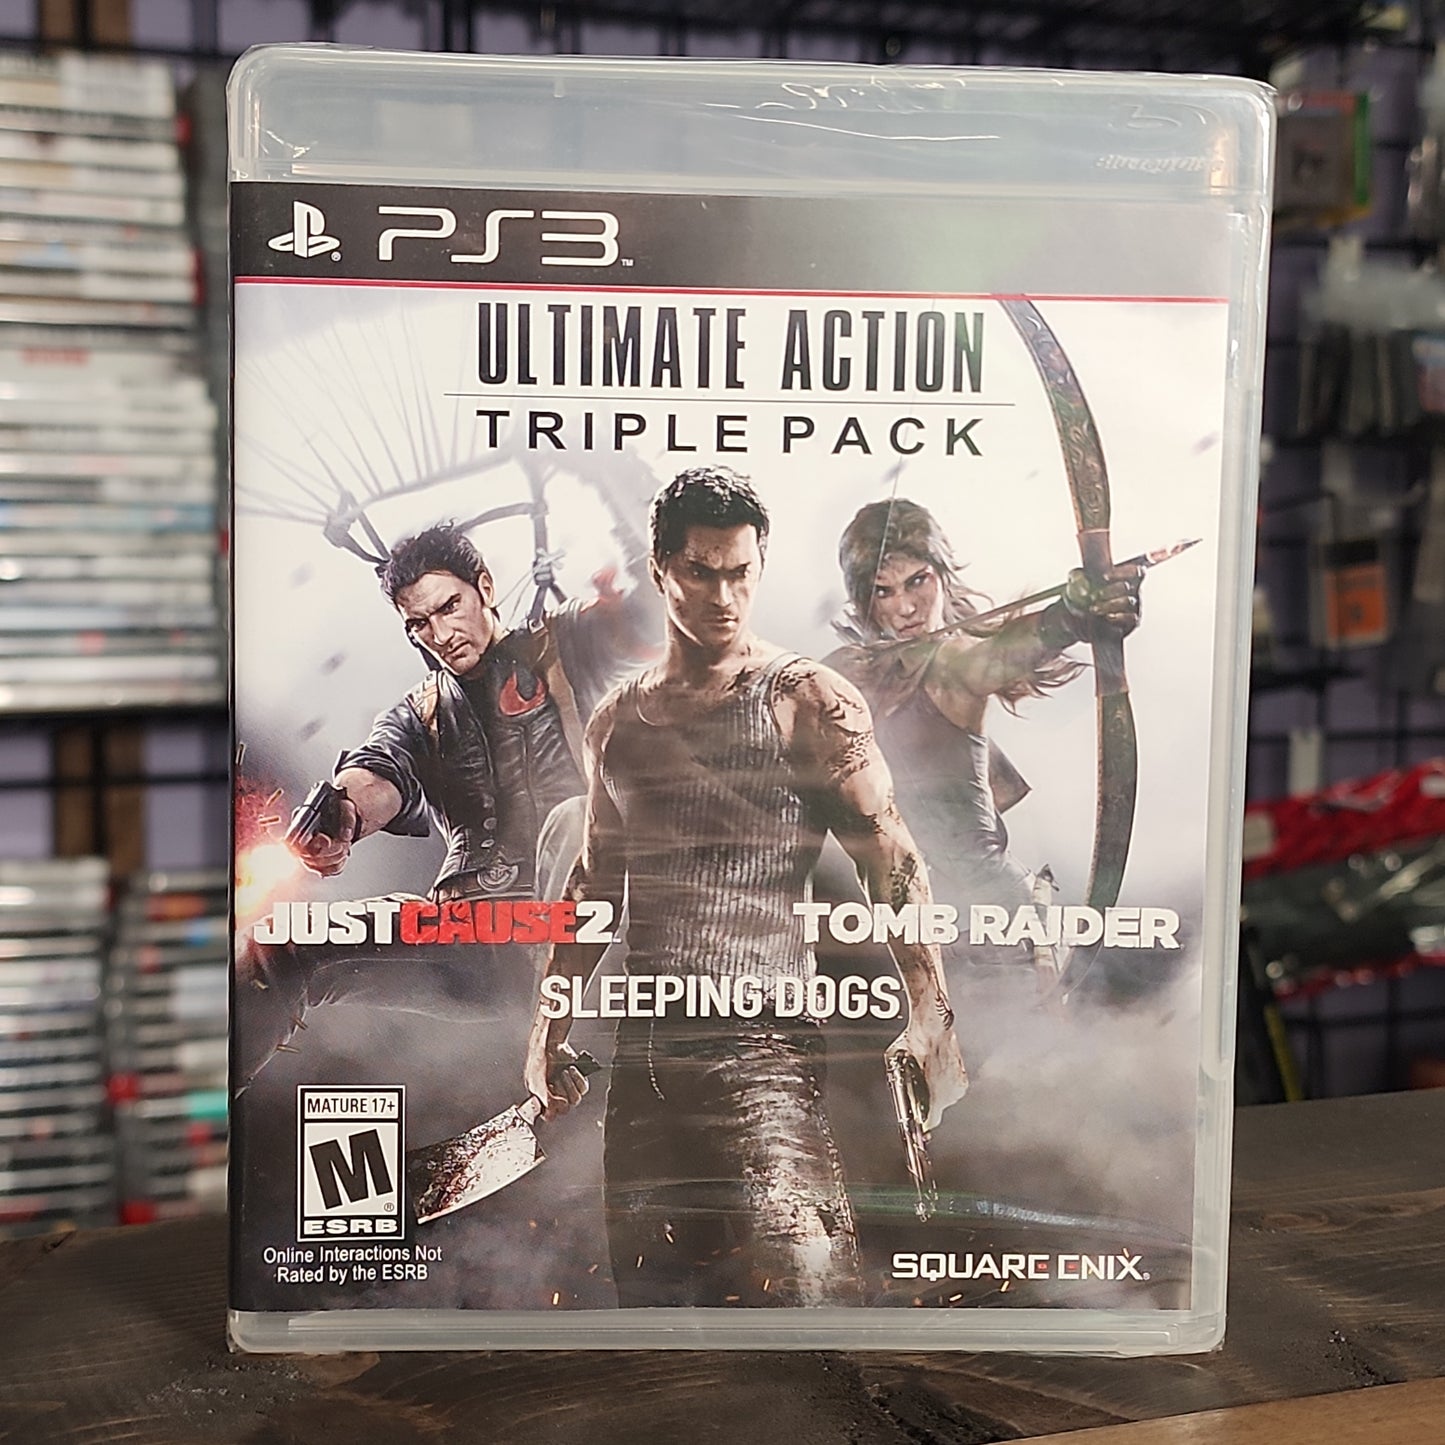 Playstation 3 - Ultimate Action Triple Pack